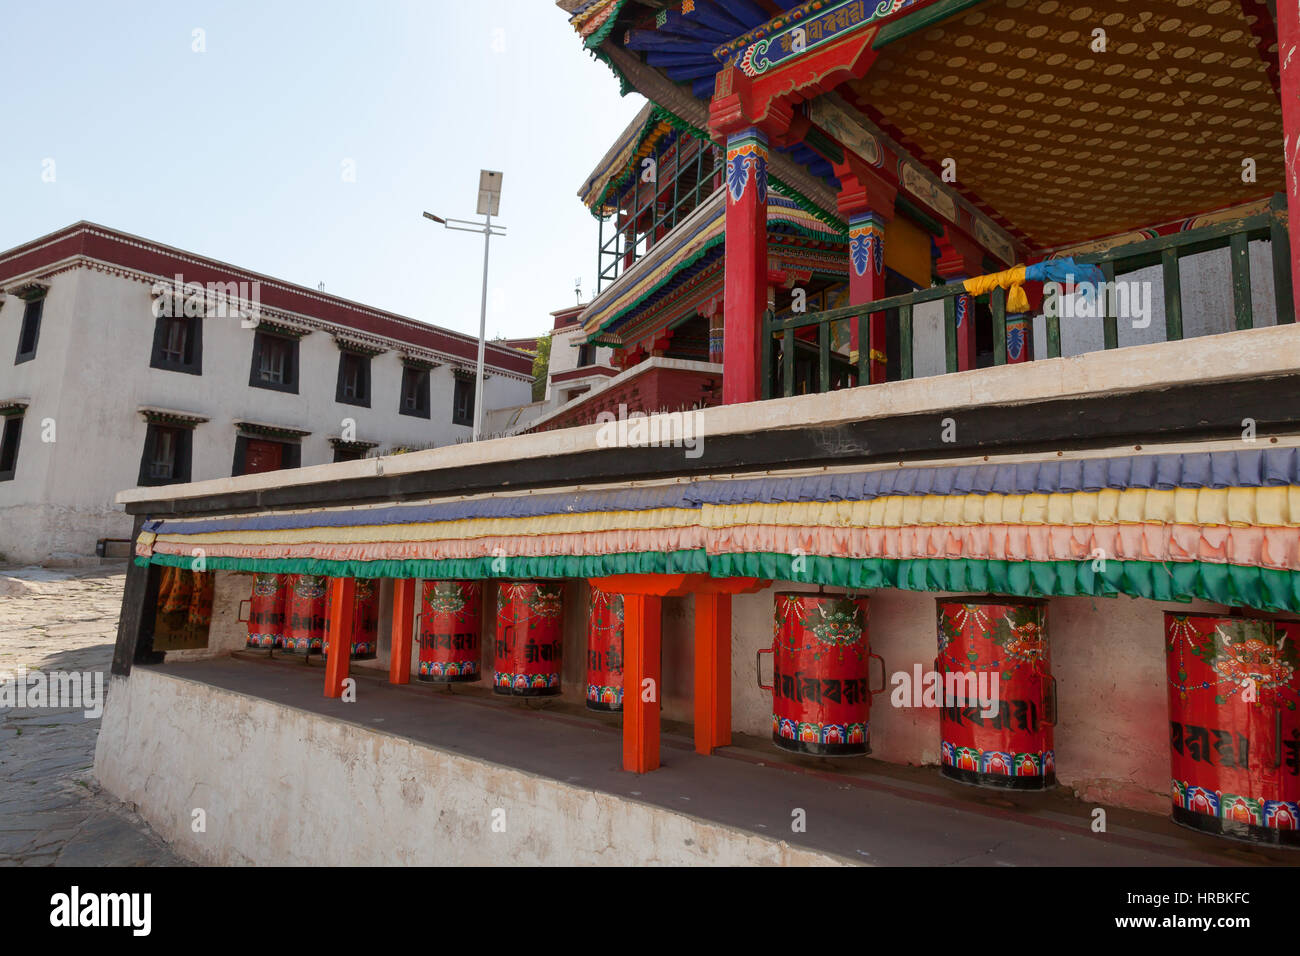 Wudangzhao Monastery located about 70km to the northeast of Baotou, Inner Mongolia, China. Stock Photo